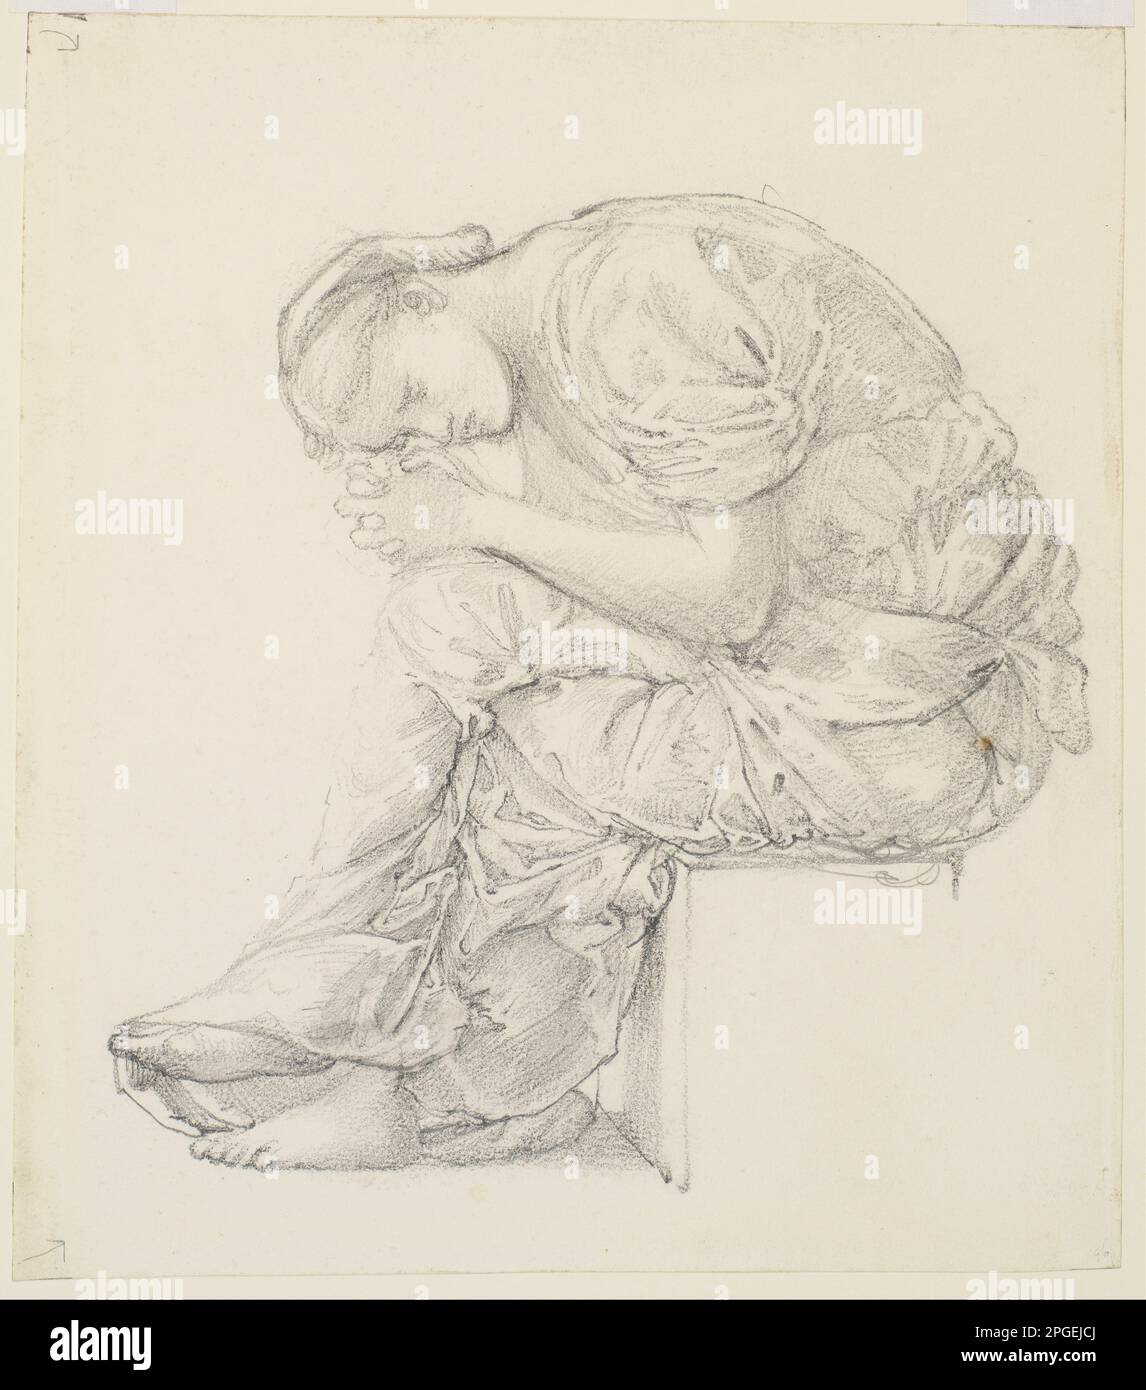 The Lament - Study for the Figure on the Right 1865/1866 by Edward Burne-Jones Stock Photo